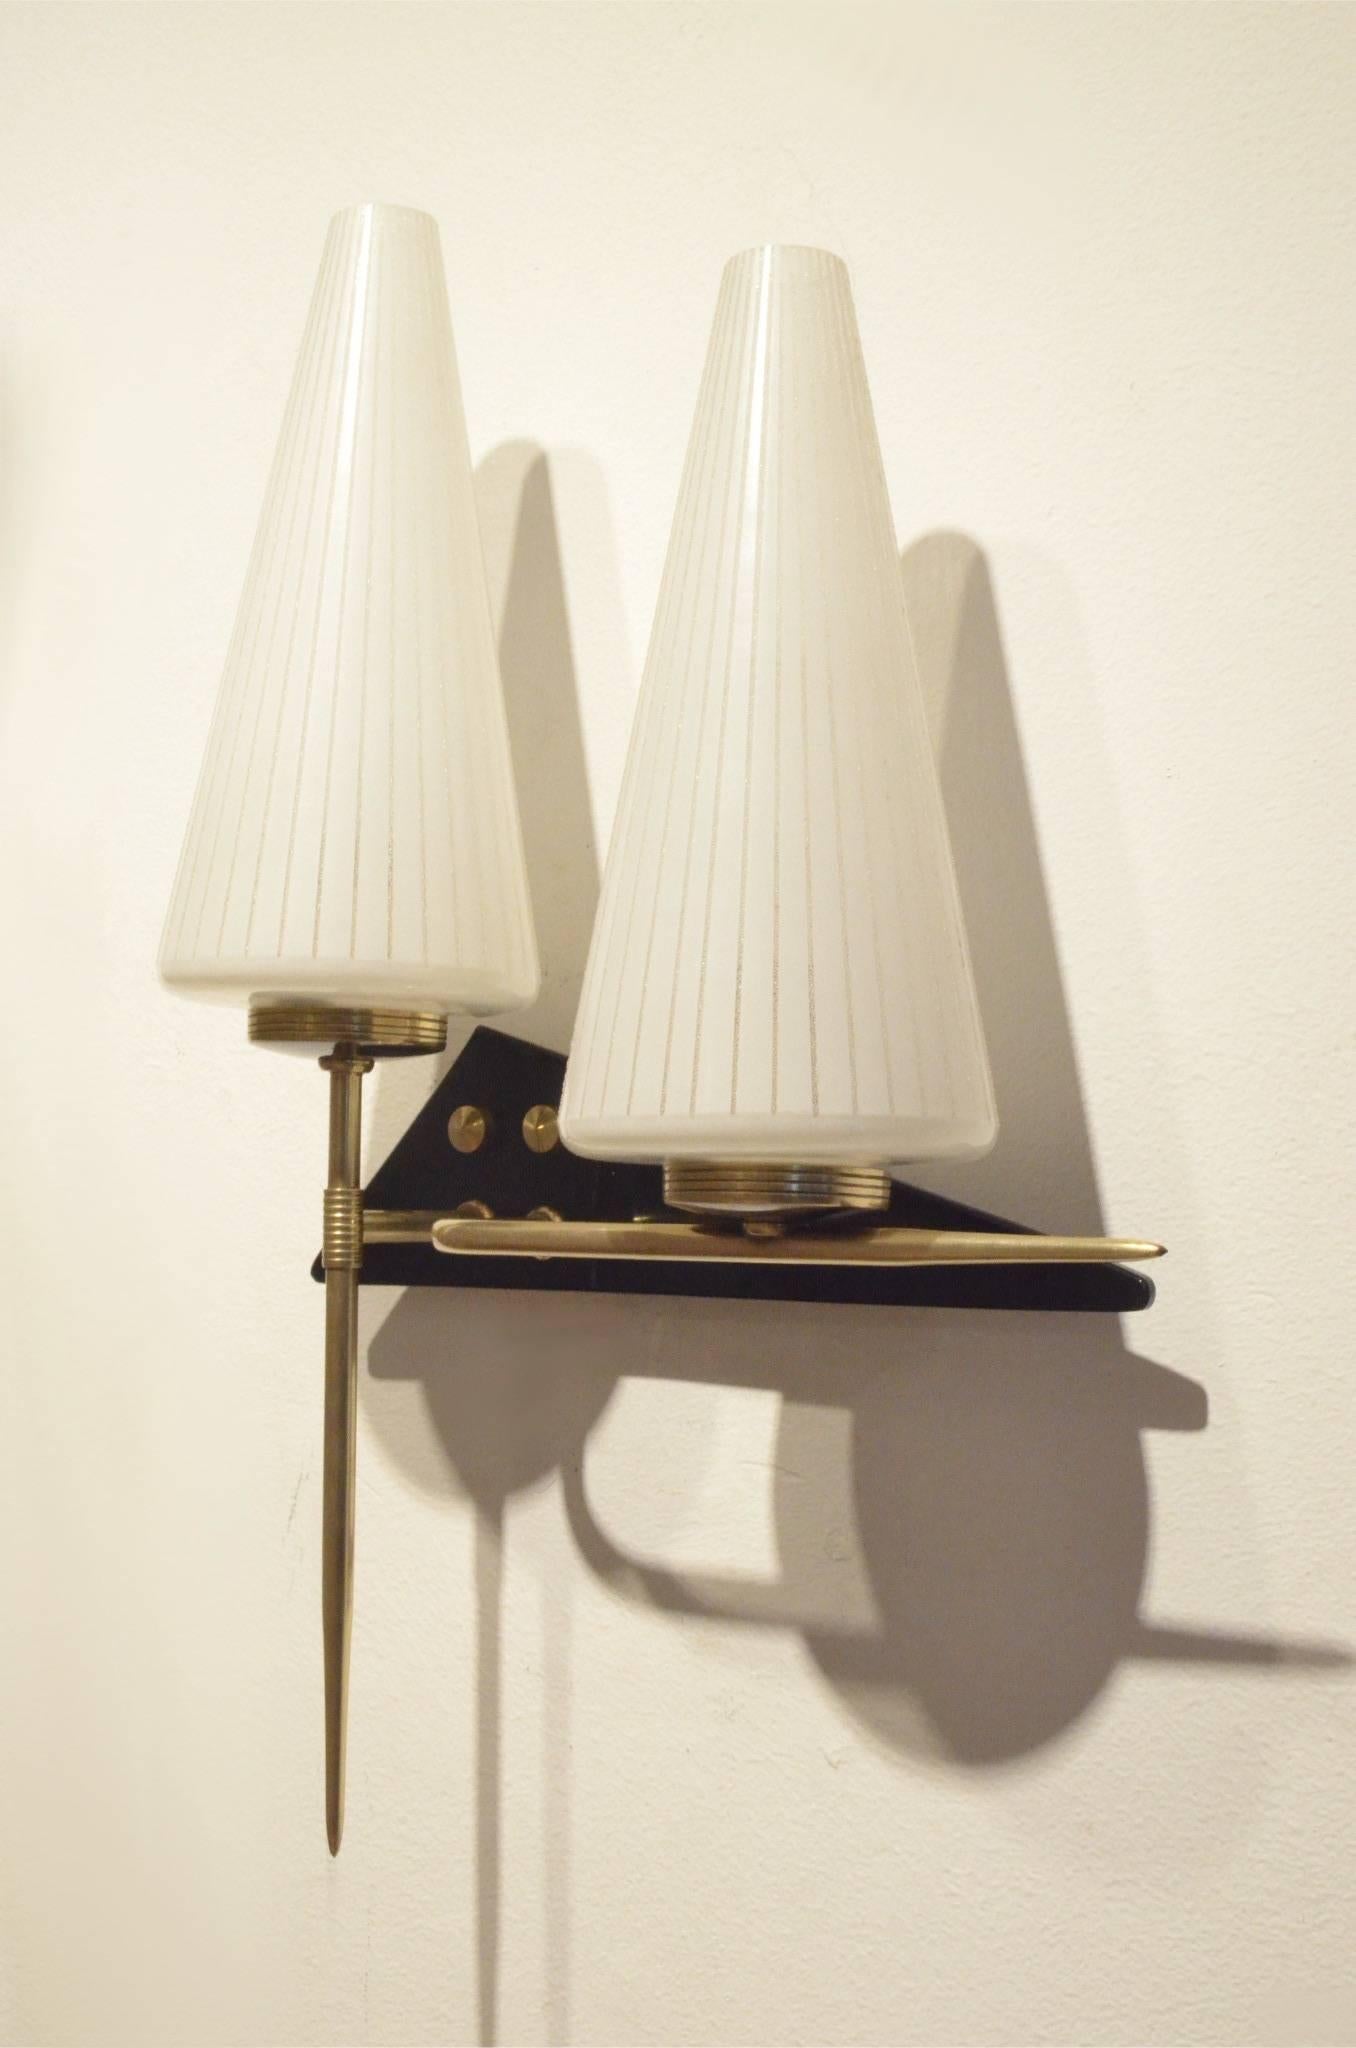 Set of 2x Mid-Century wall sconces from Maison Arlus, triangle shaped black plexiglas bases matching brass elements and cone shaped glass diffusers.